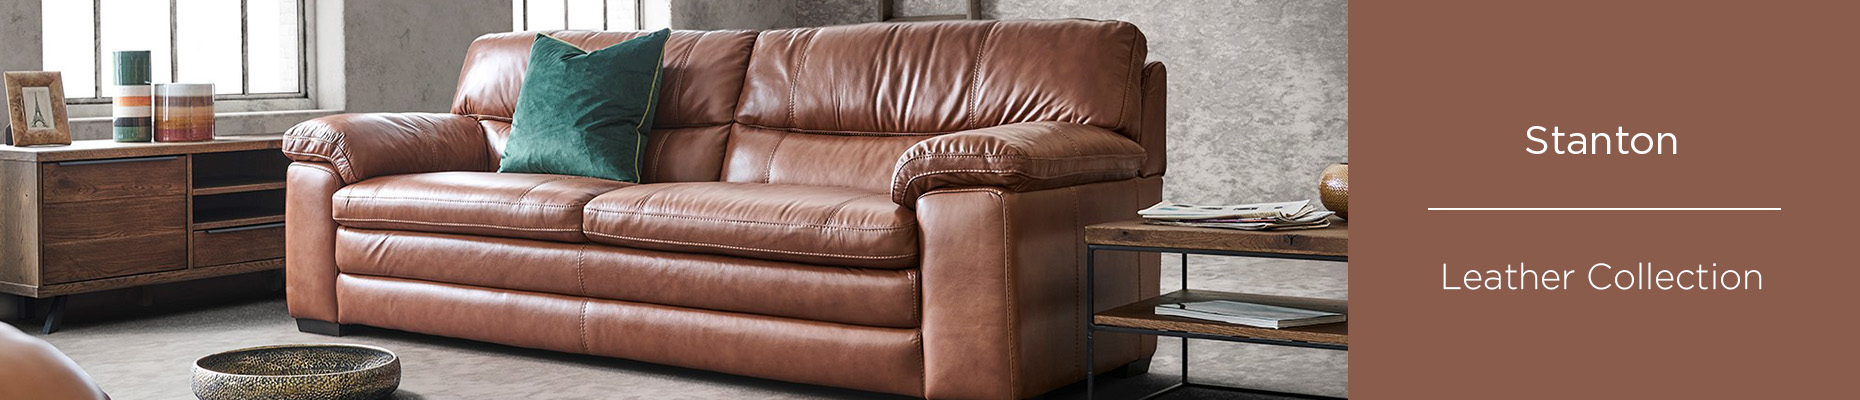 Stanton Sofa collection at Forrest Furnishing